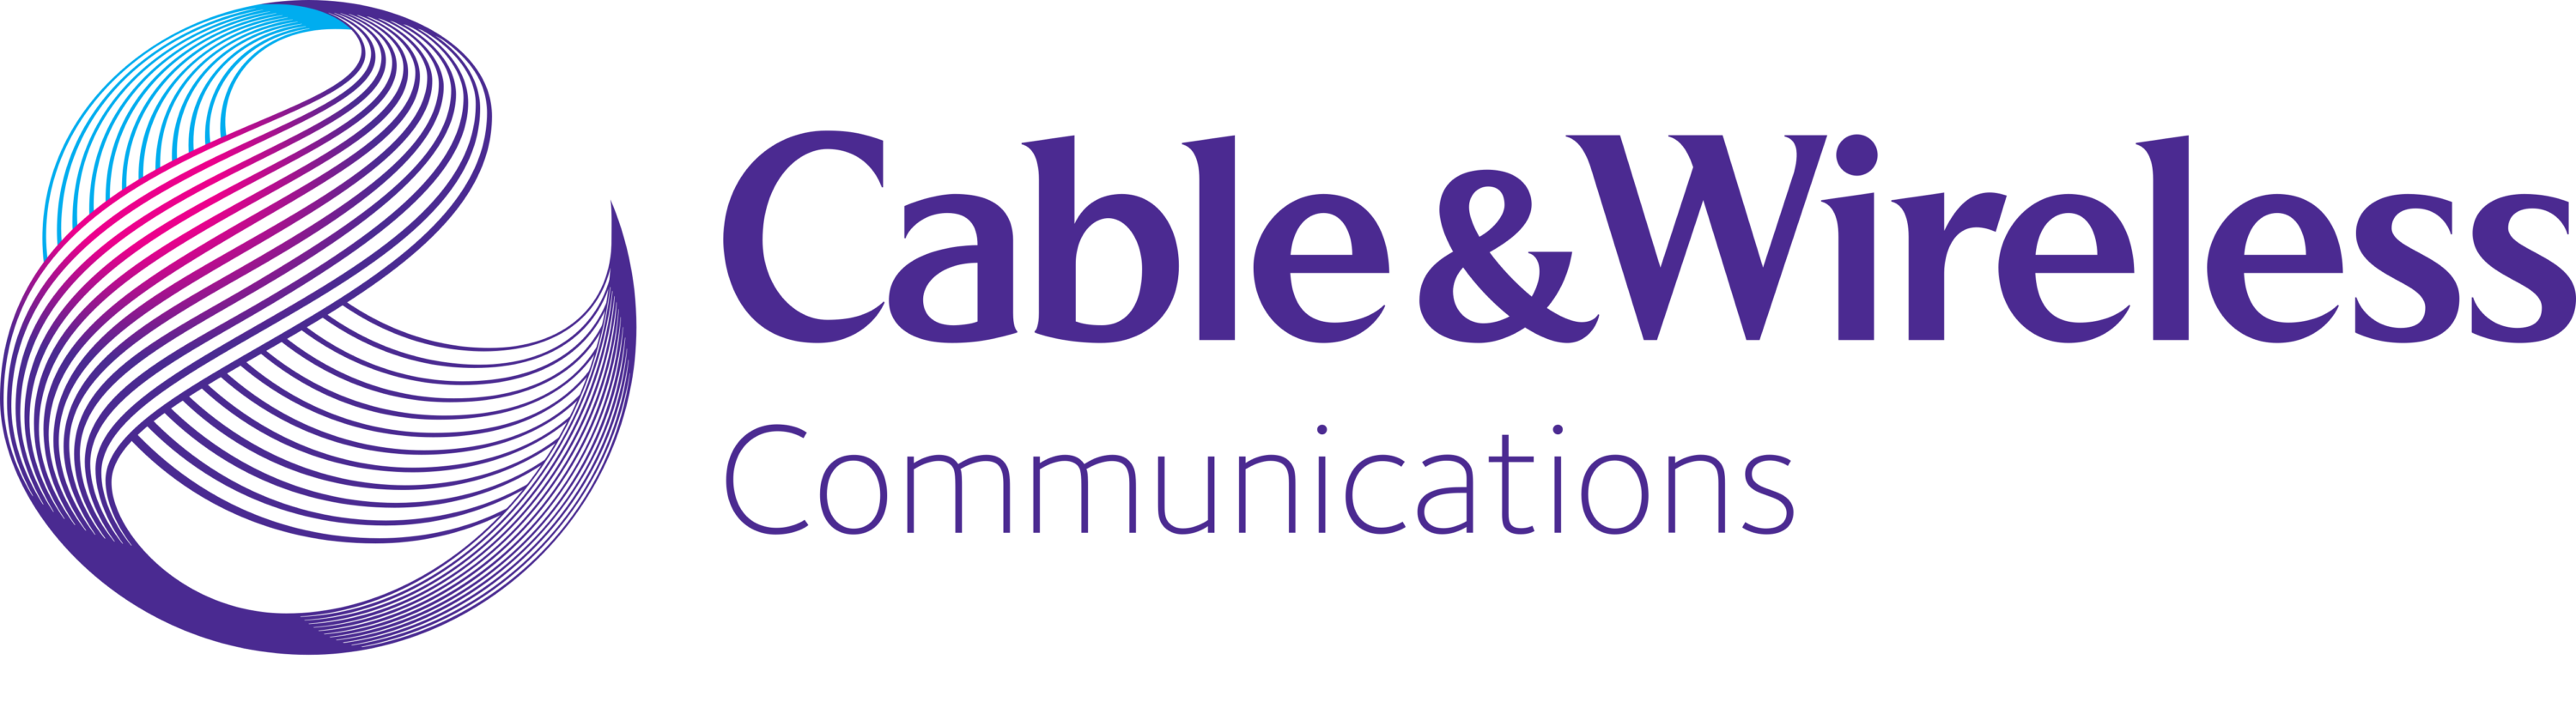 Cable & Wireless Communications Logo